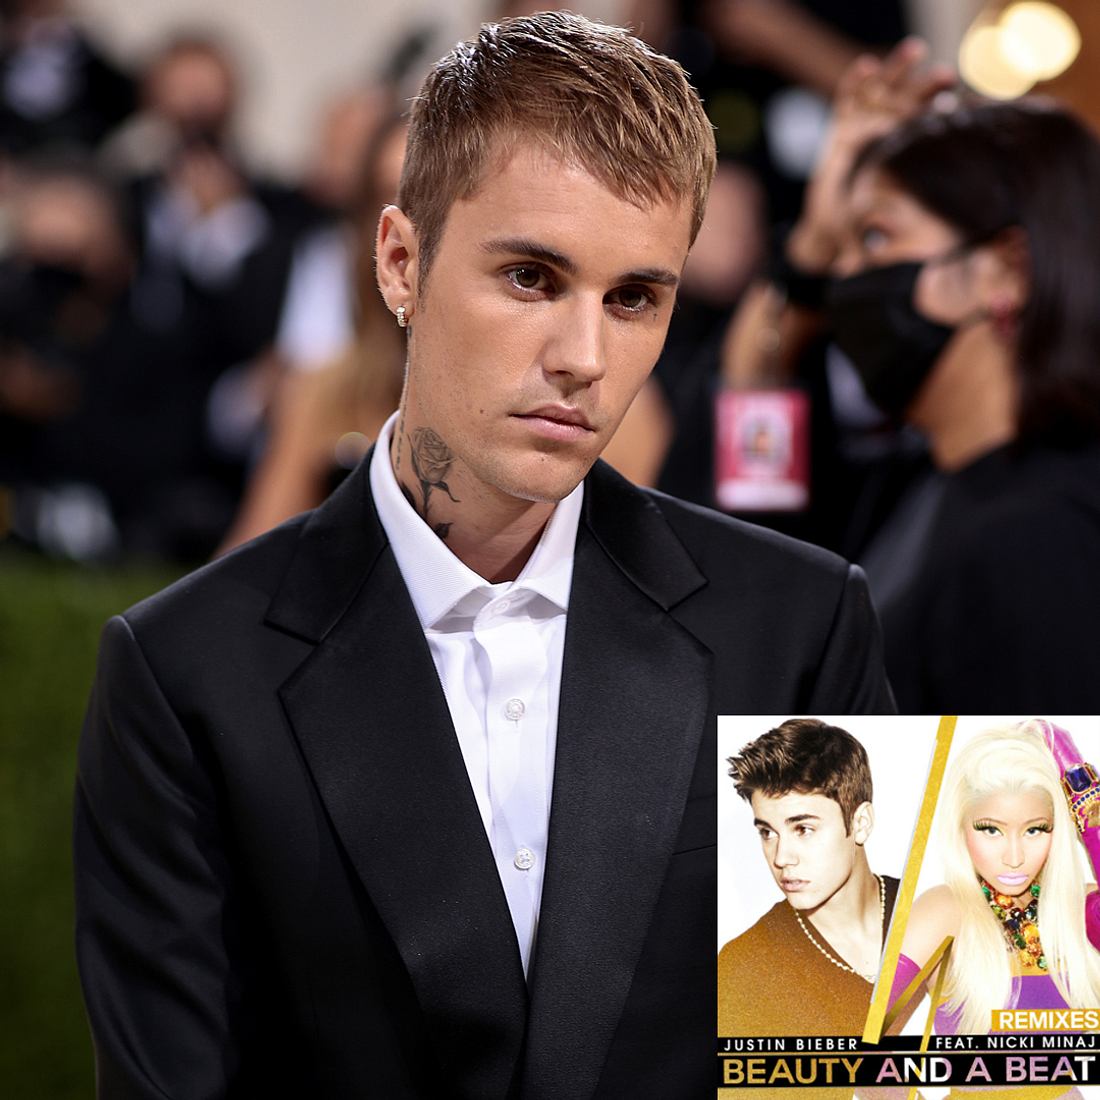 Stars, die ihre Songs hassen: Justin Bieber – Beauty and a Beat